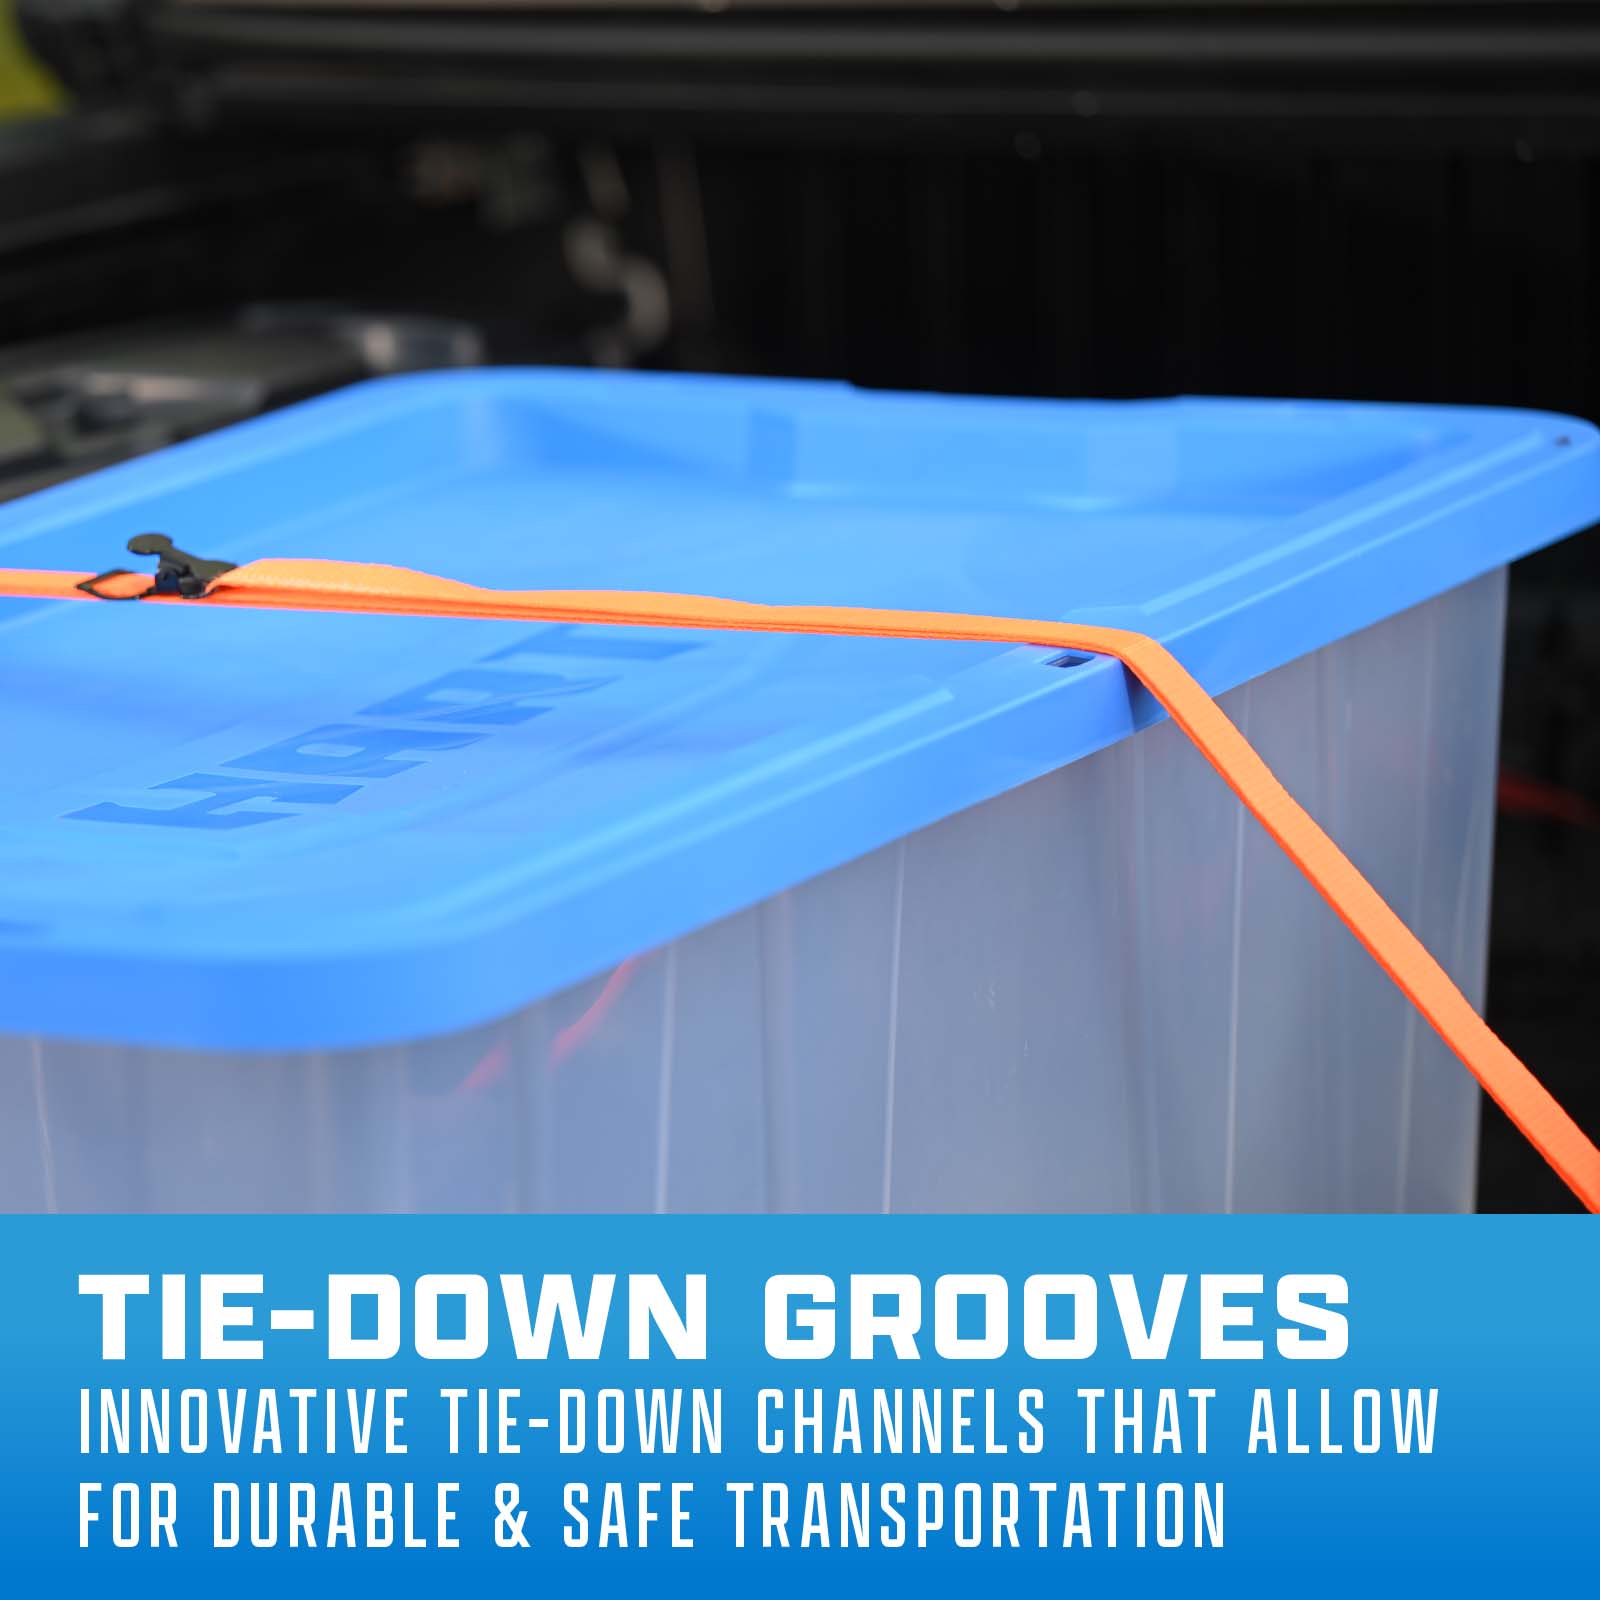 Tie down grooves that allow for durable & safe transportation